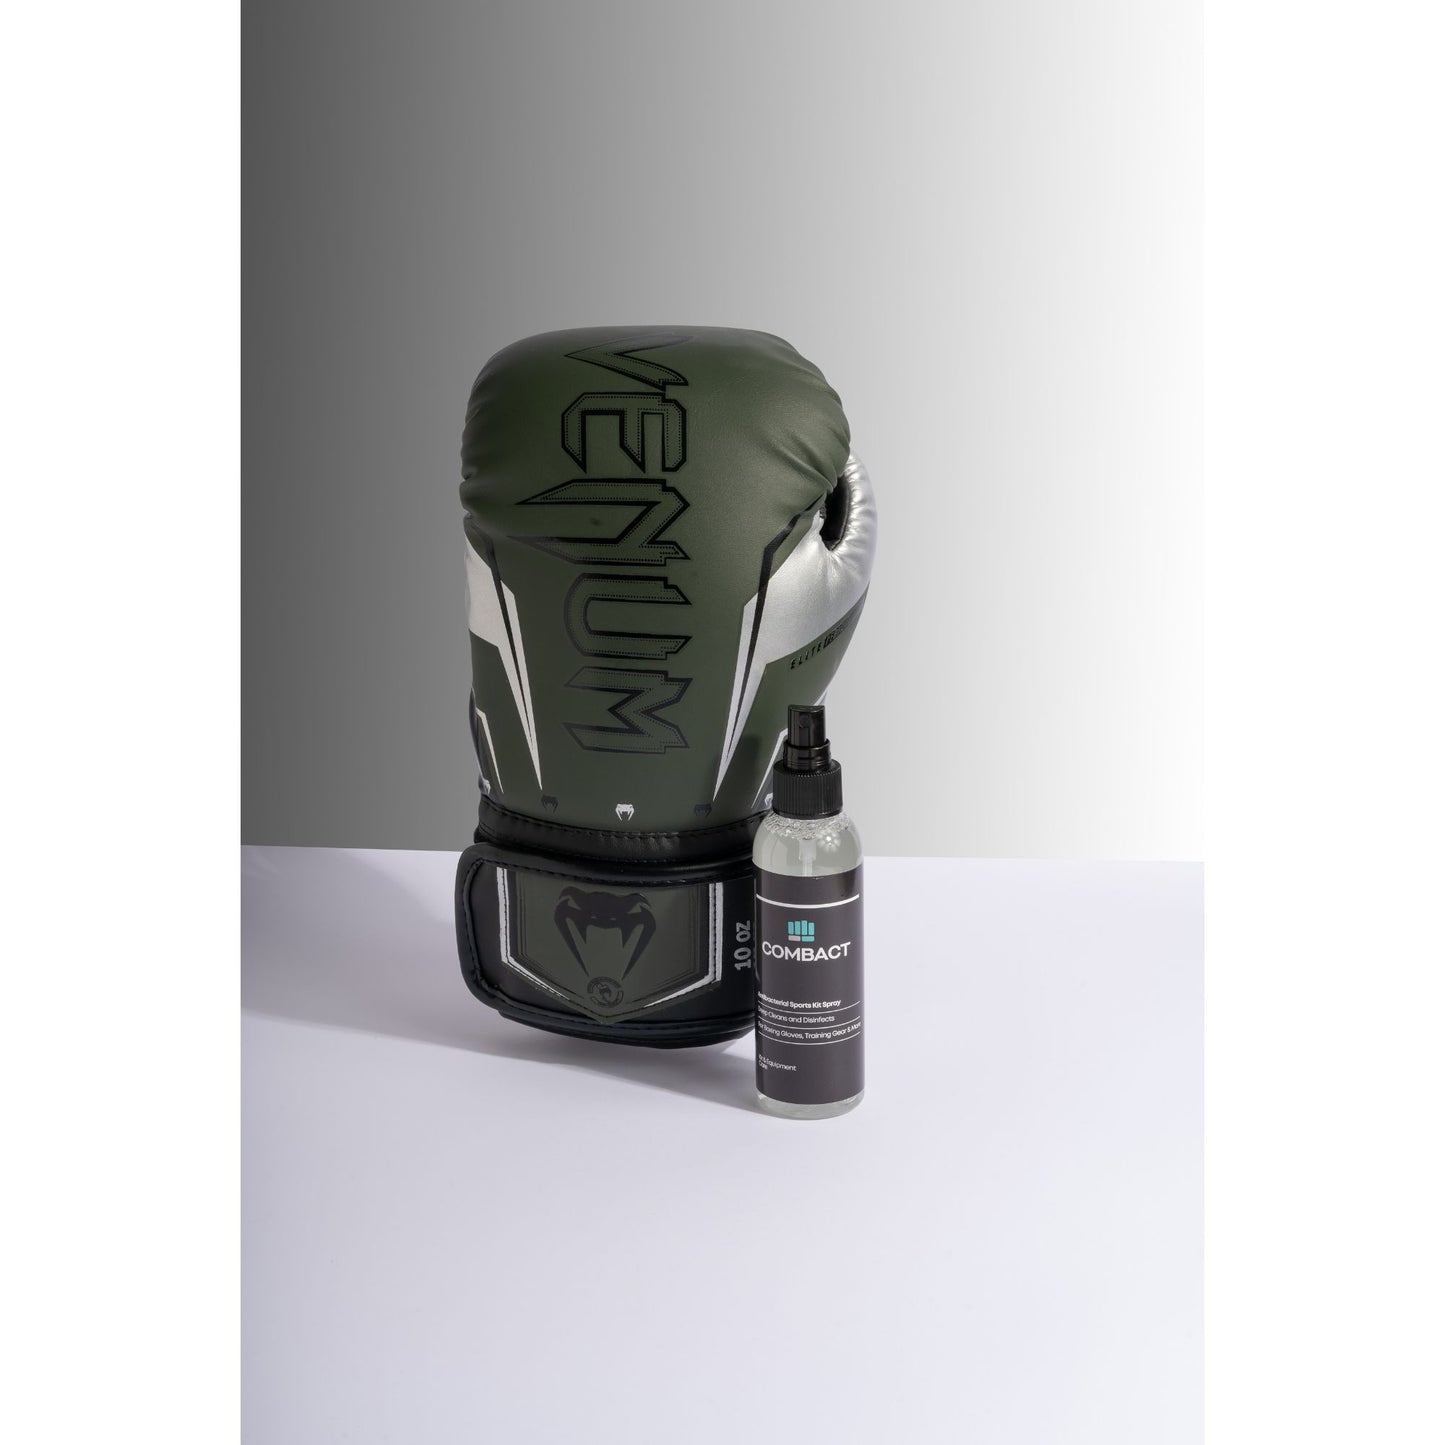 Antibacterial Sports Kit Spray for Boxing Gloves 